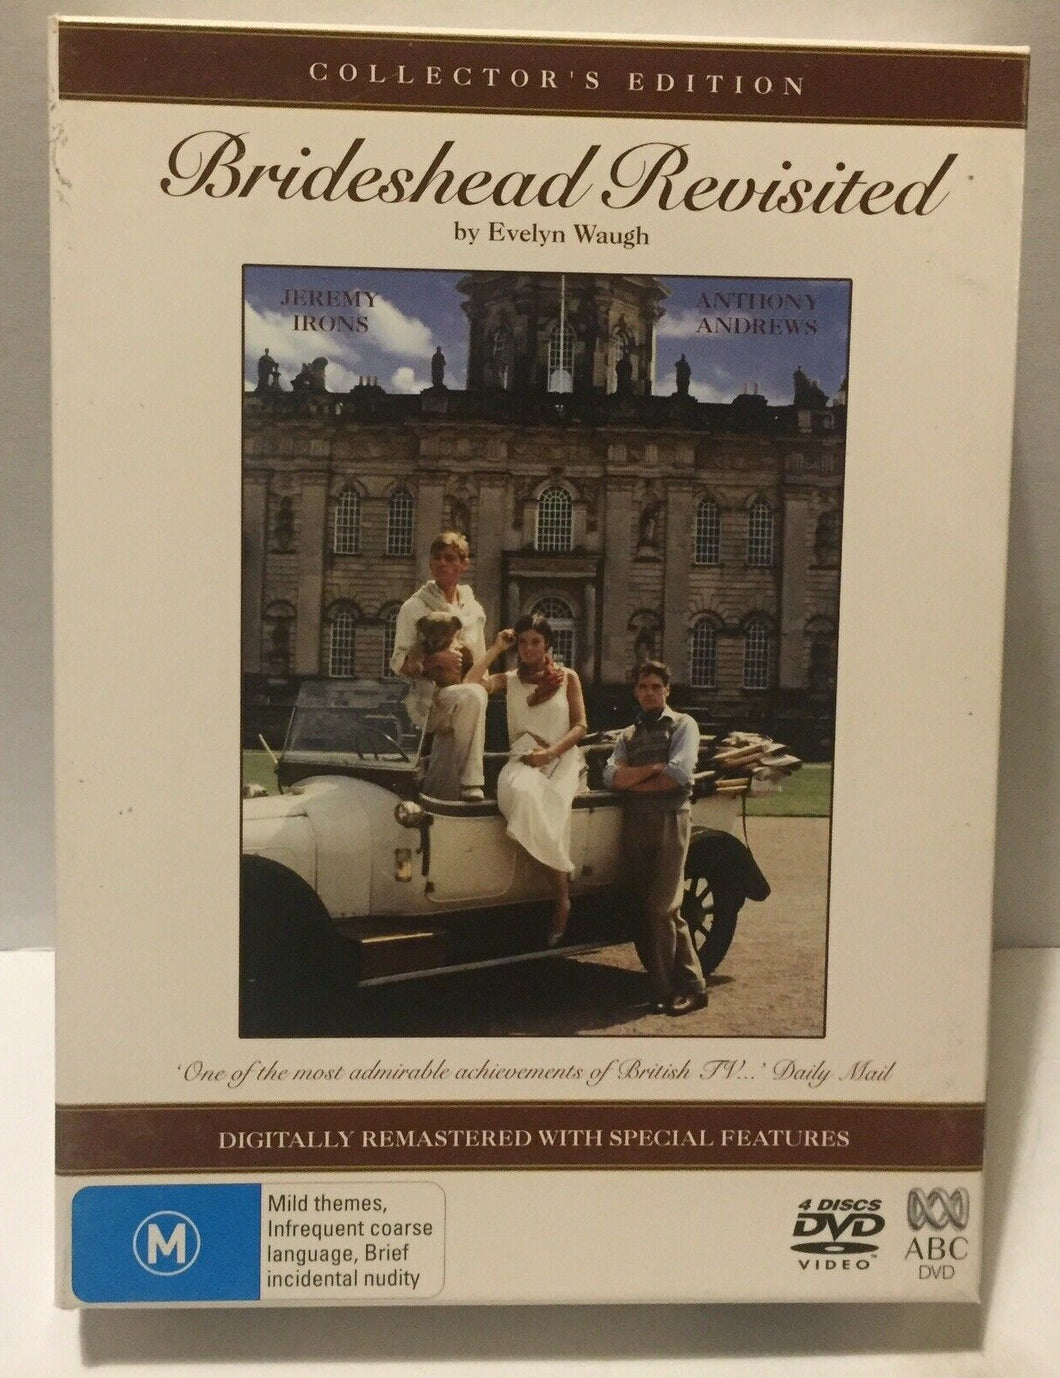 BRIDESHEAD REVISITED - COMPLETE SERIES 4X DVD SET -ANTHONY ANDREWS JEREMY IRONS